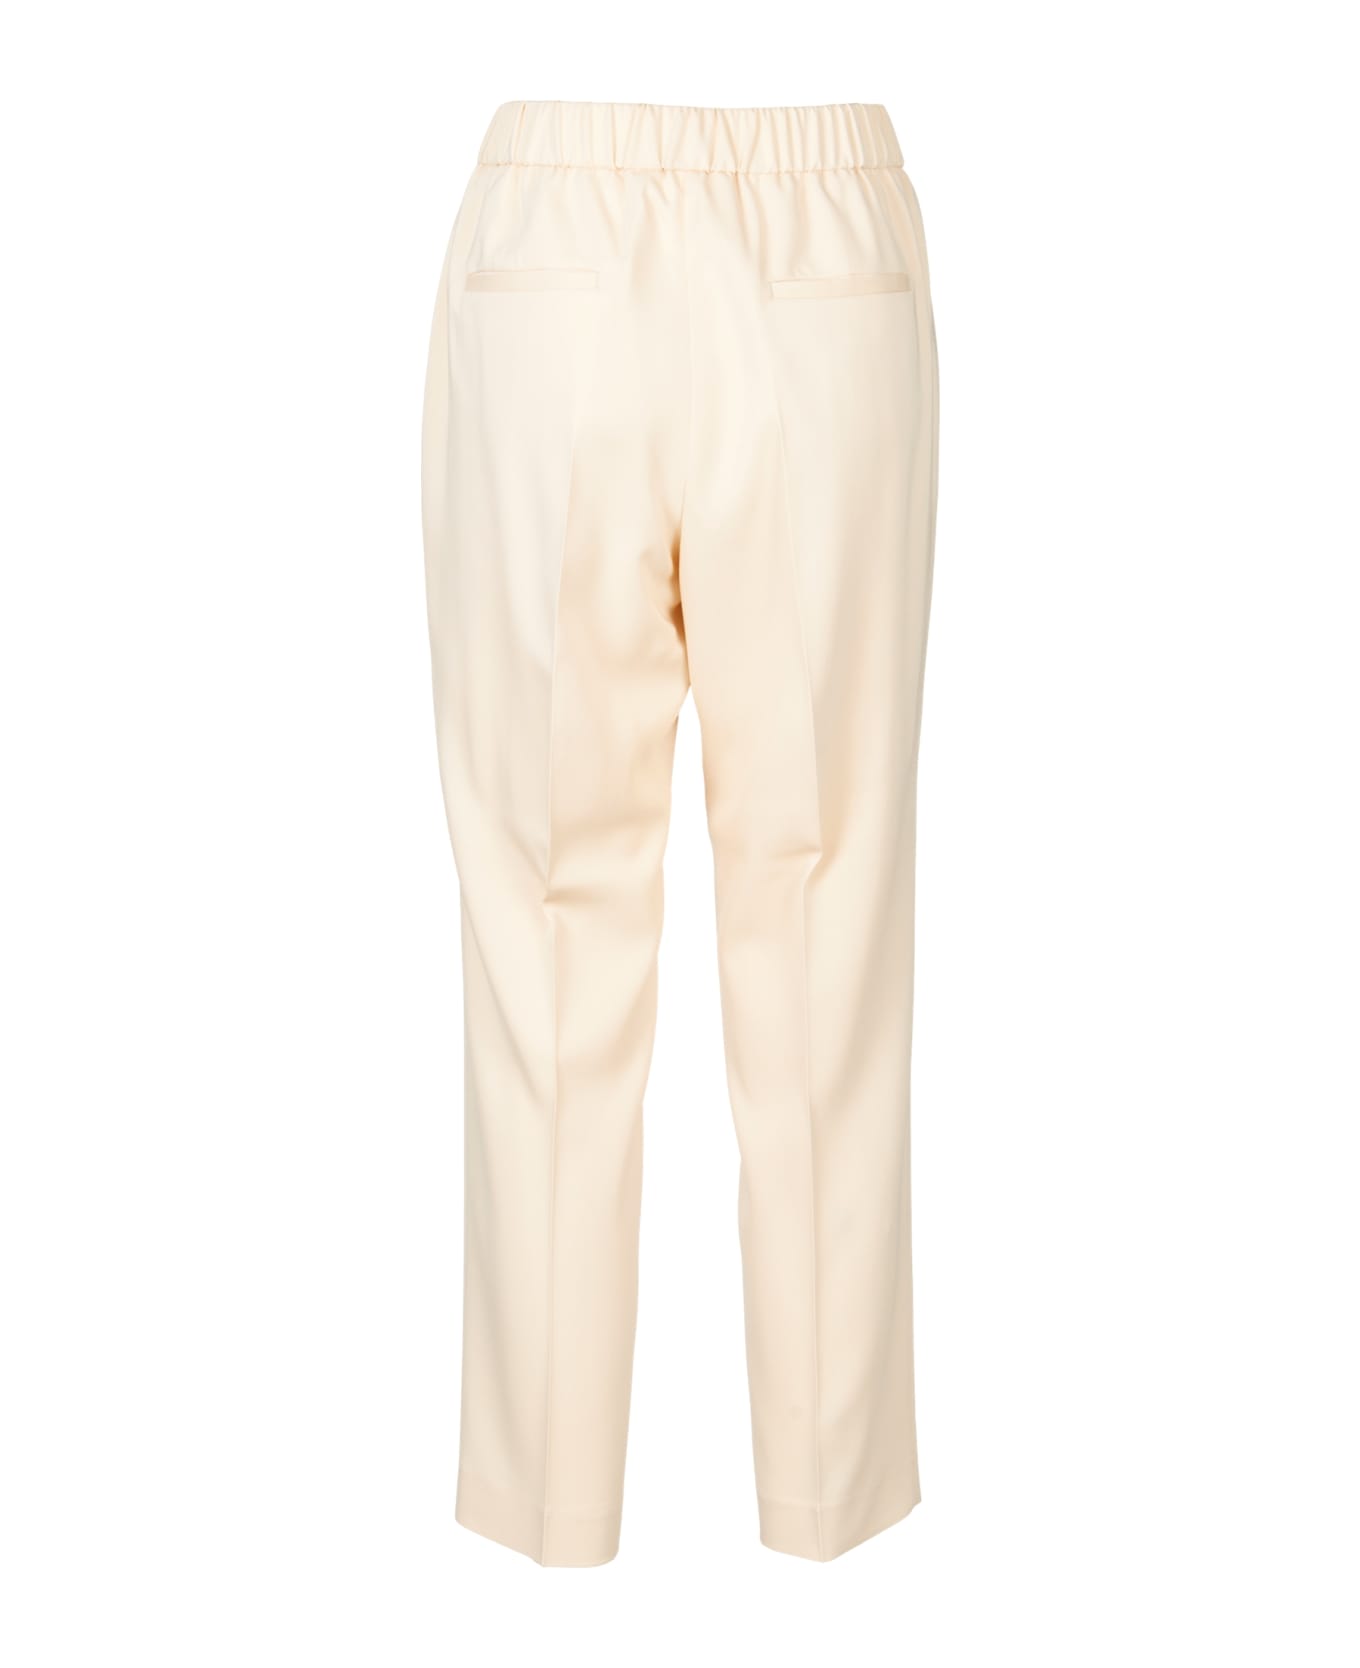 Peserico Trousers - Brown